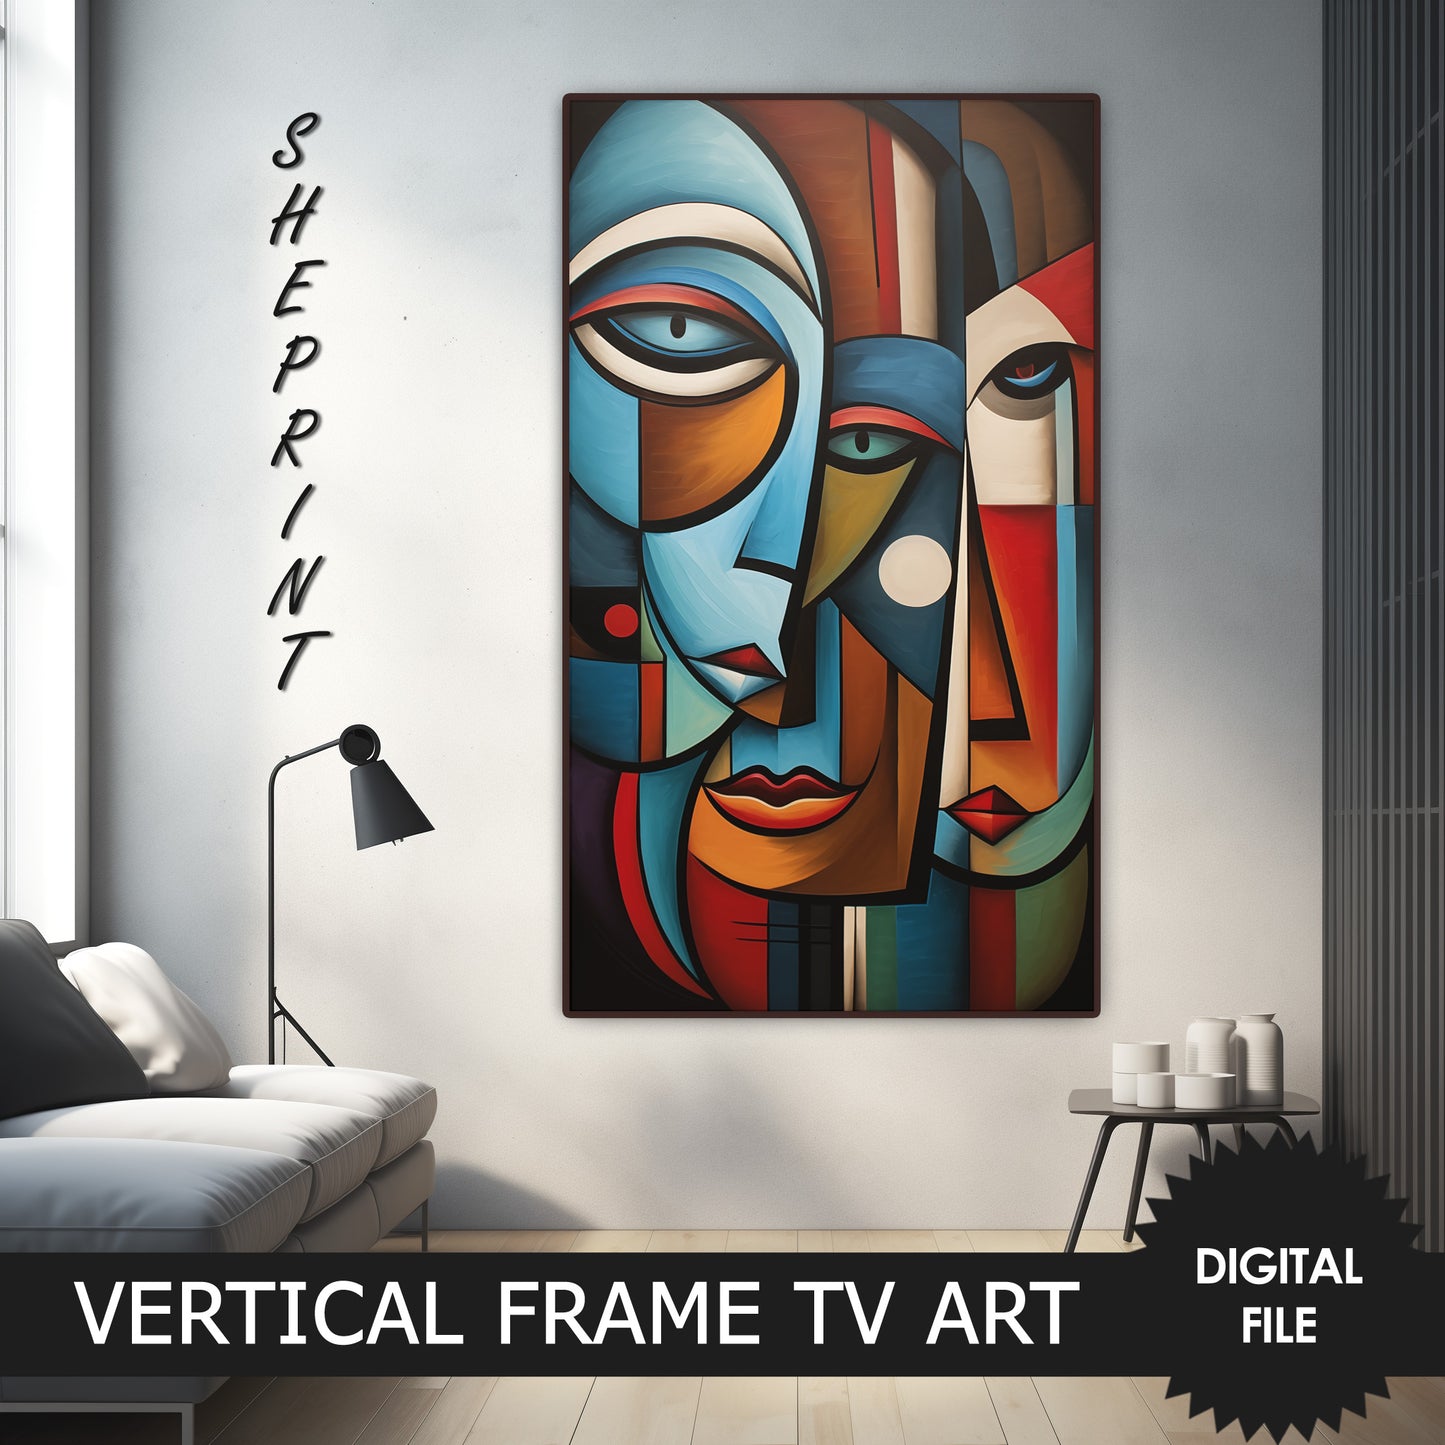 Vertical Frame TV Art, Colorful Abstract Faces, Digital TV Art, preview on Samsung Frame TV when mounted vertically